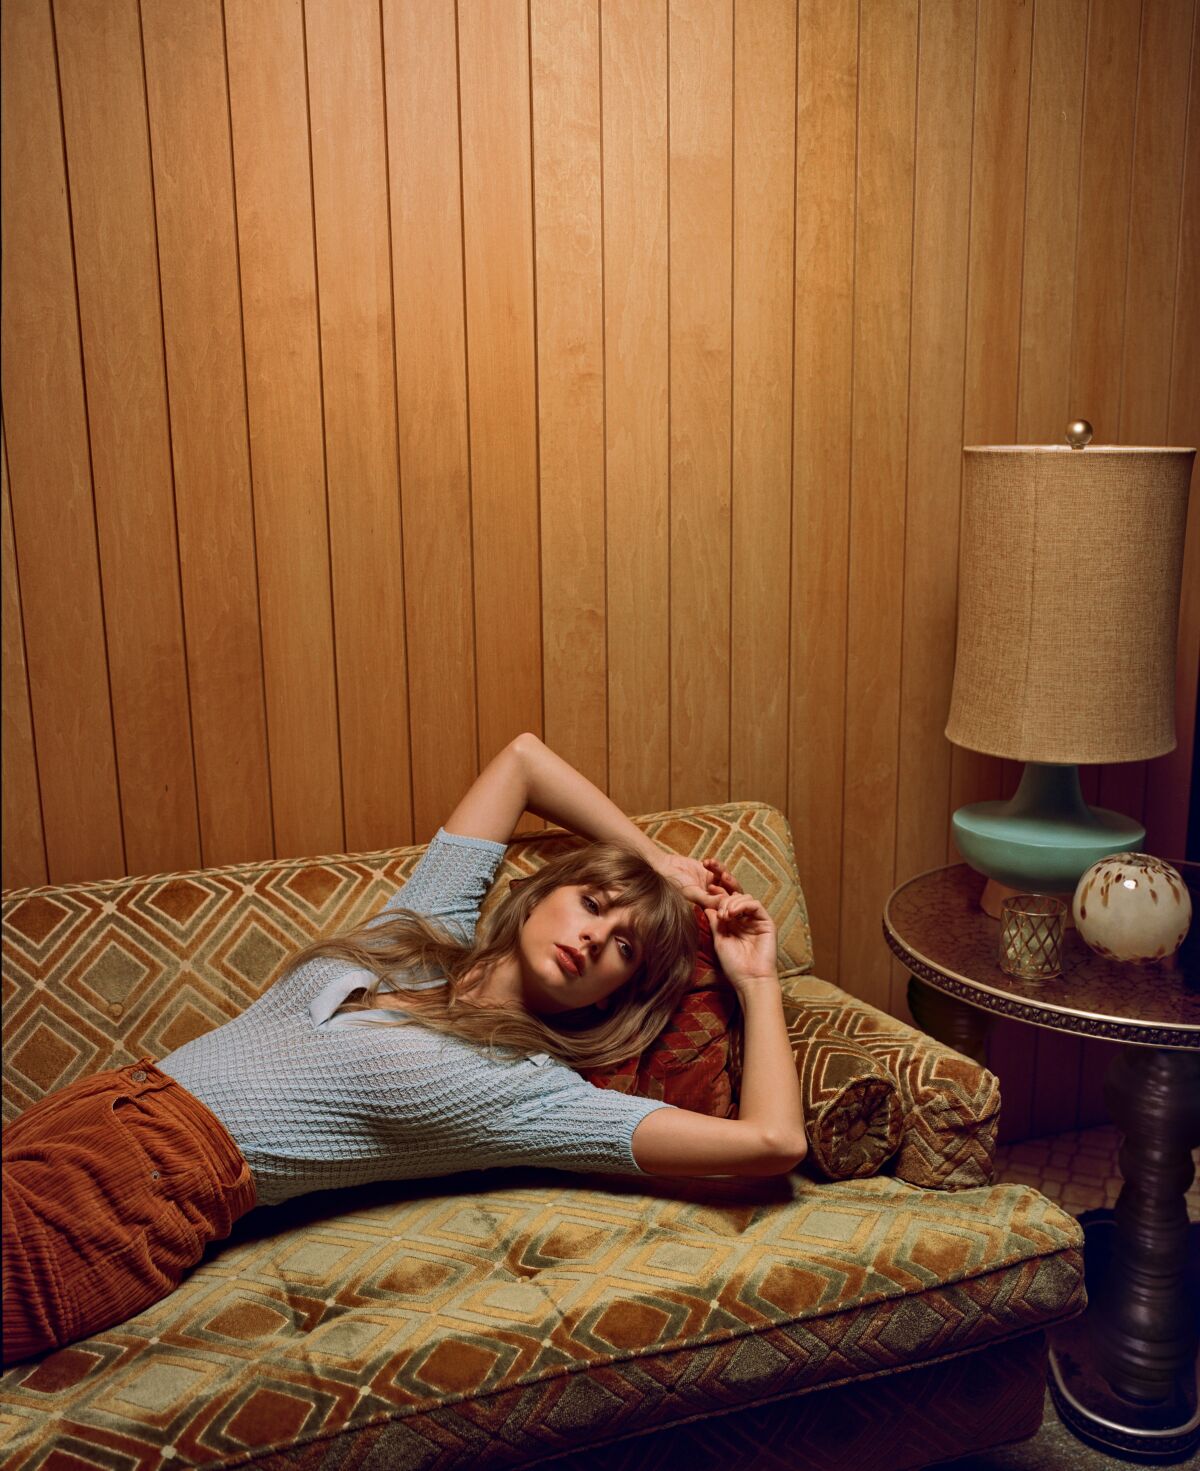 A woman reclines on a sofa in a wood-paneled room